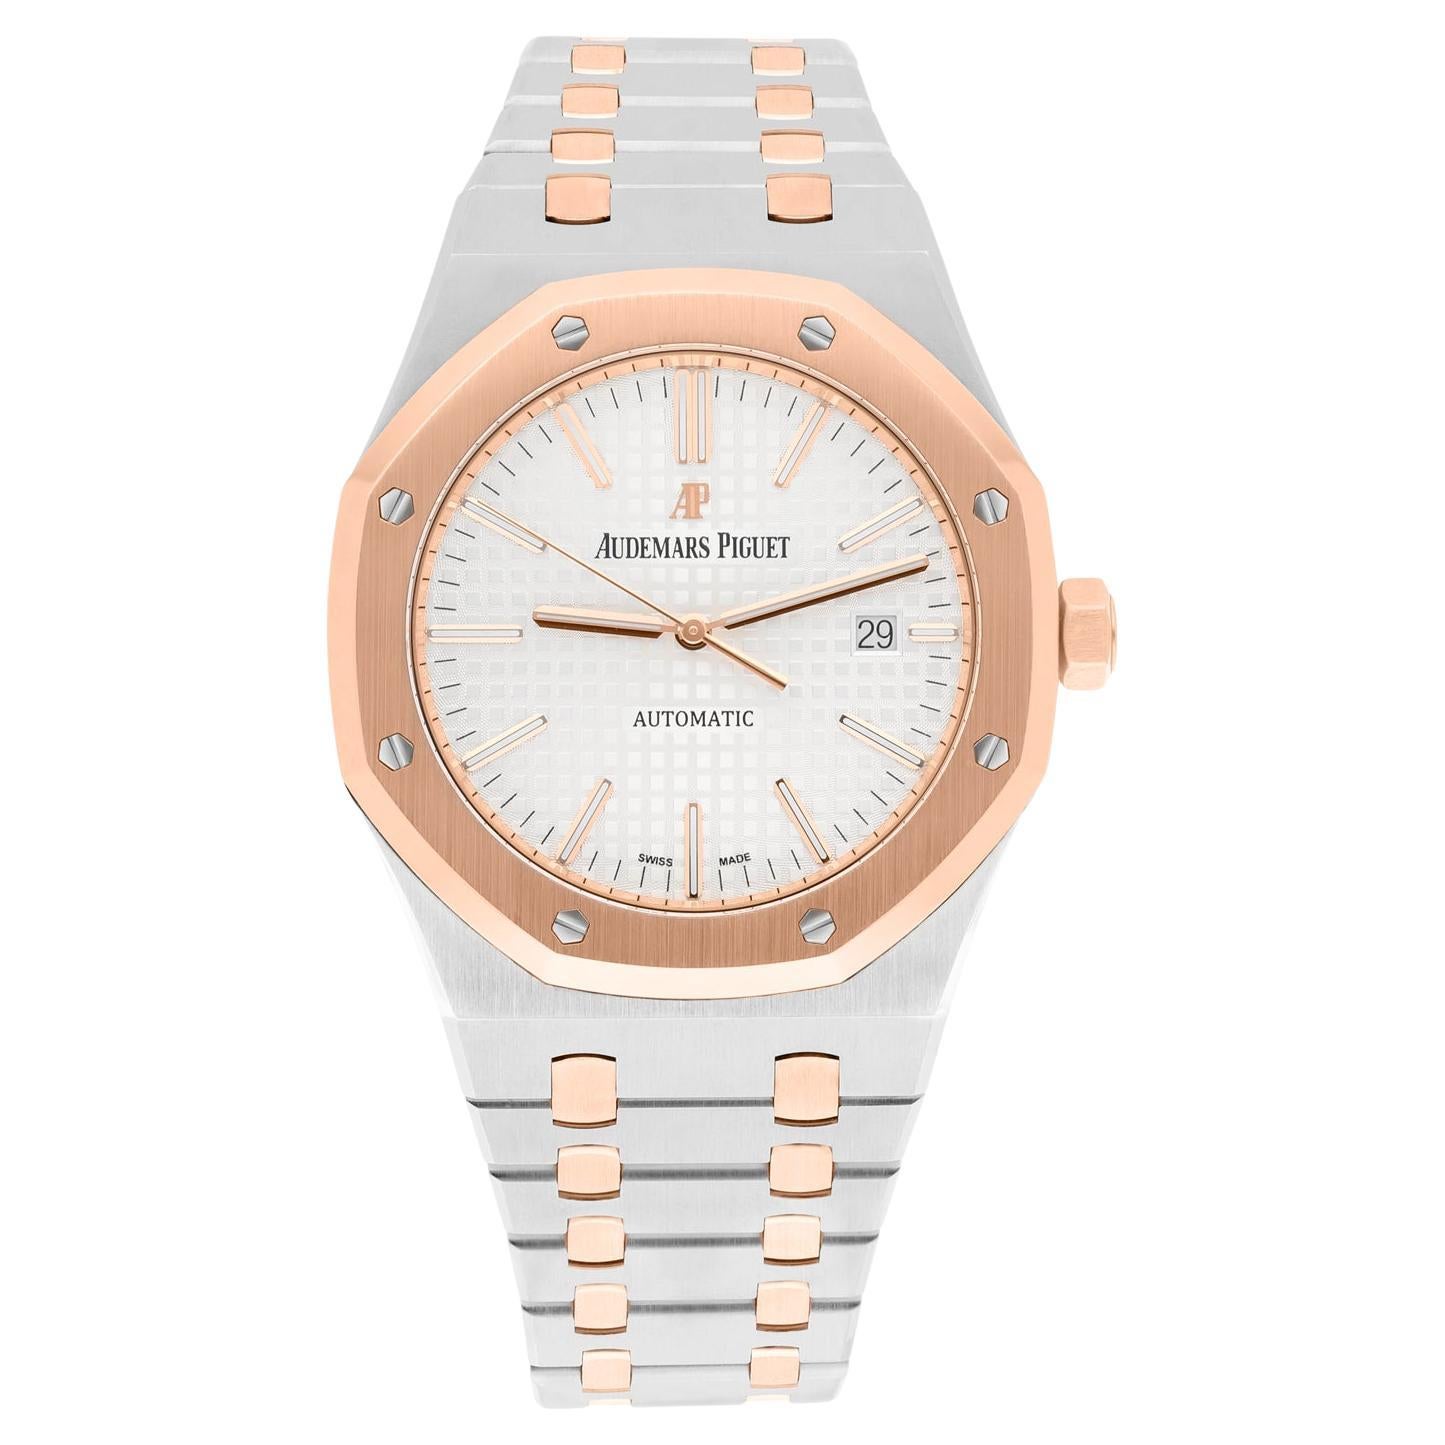 Stainless steel case with a stainless steel bracelet with 18kt rose gold links. Fixed 18kt rose gold bezel. Silver dial with rose gold-tone hands and index hour markers. Minute markers around the outer rim. Dial Type: Analog. Luminescent hands and